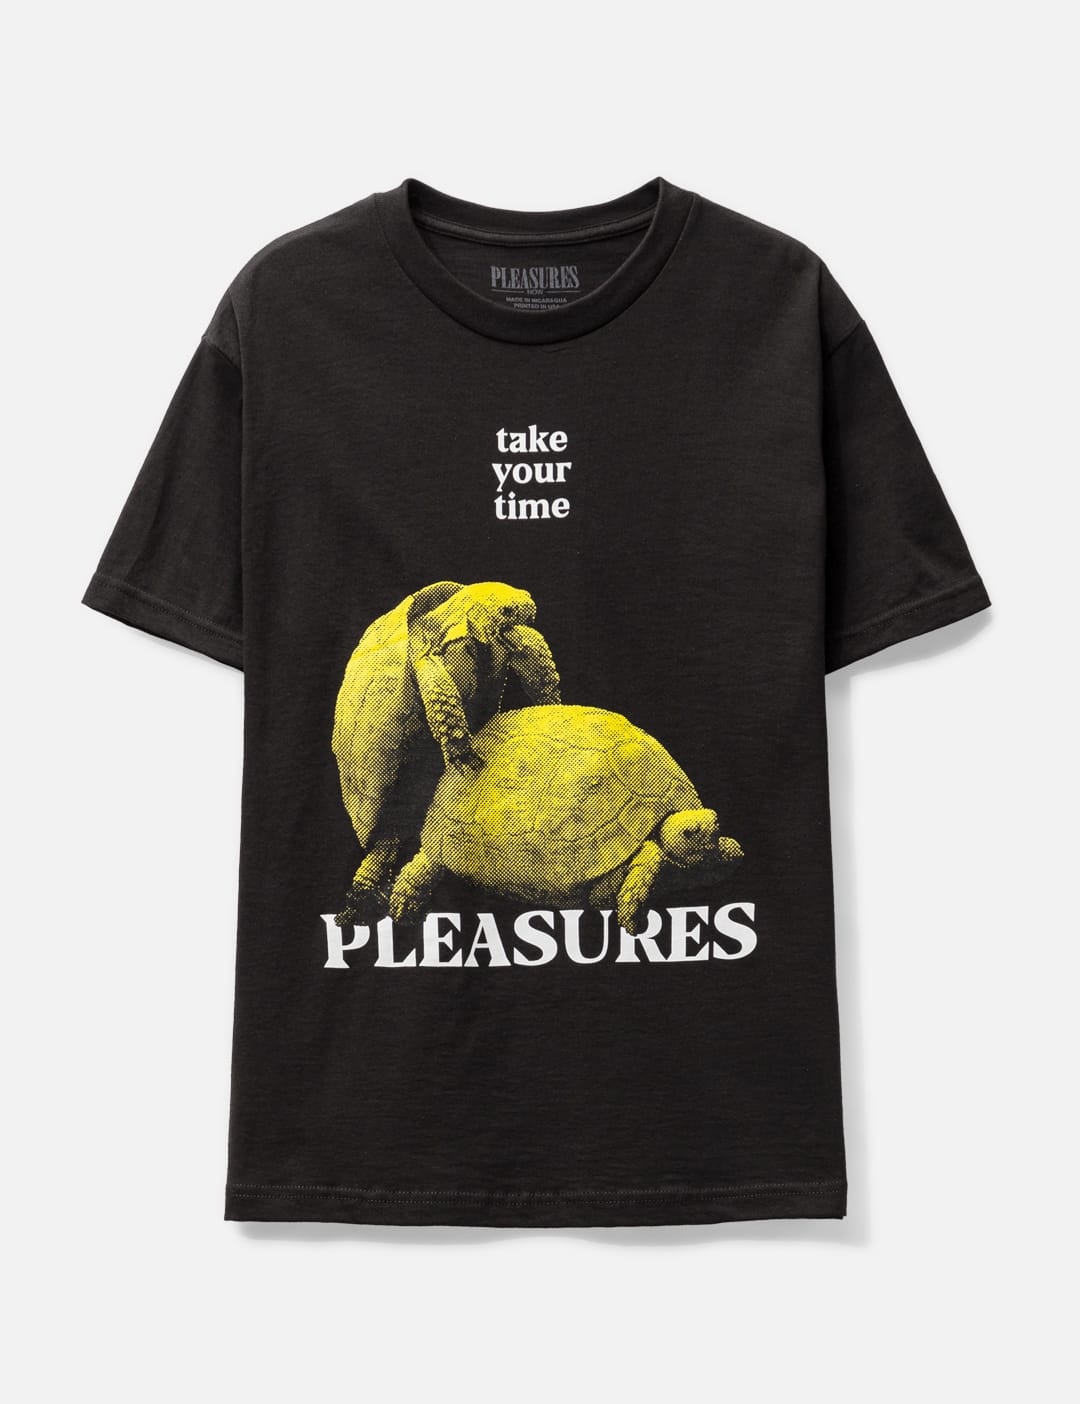 Pleasures - YOUR TIME T-SHIRT | HBX - Globally Curated Fashion and 